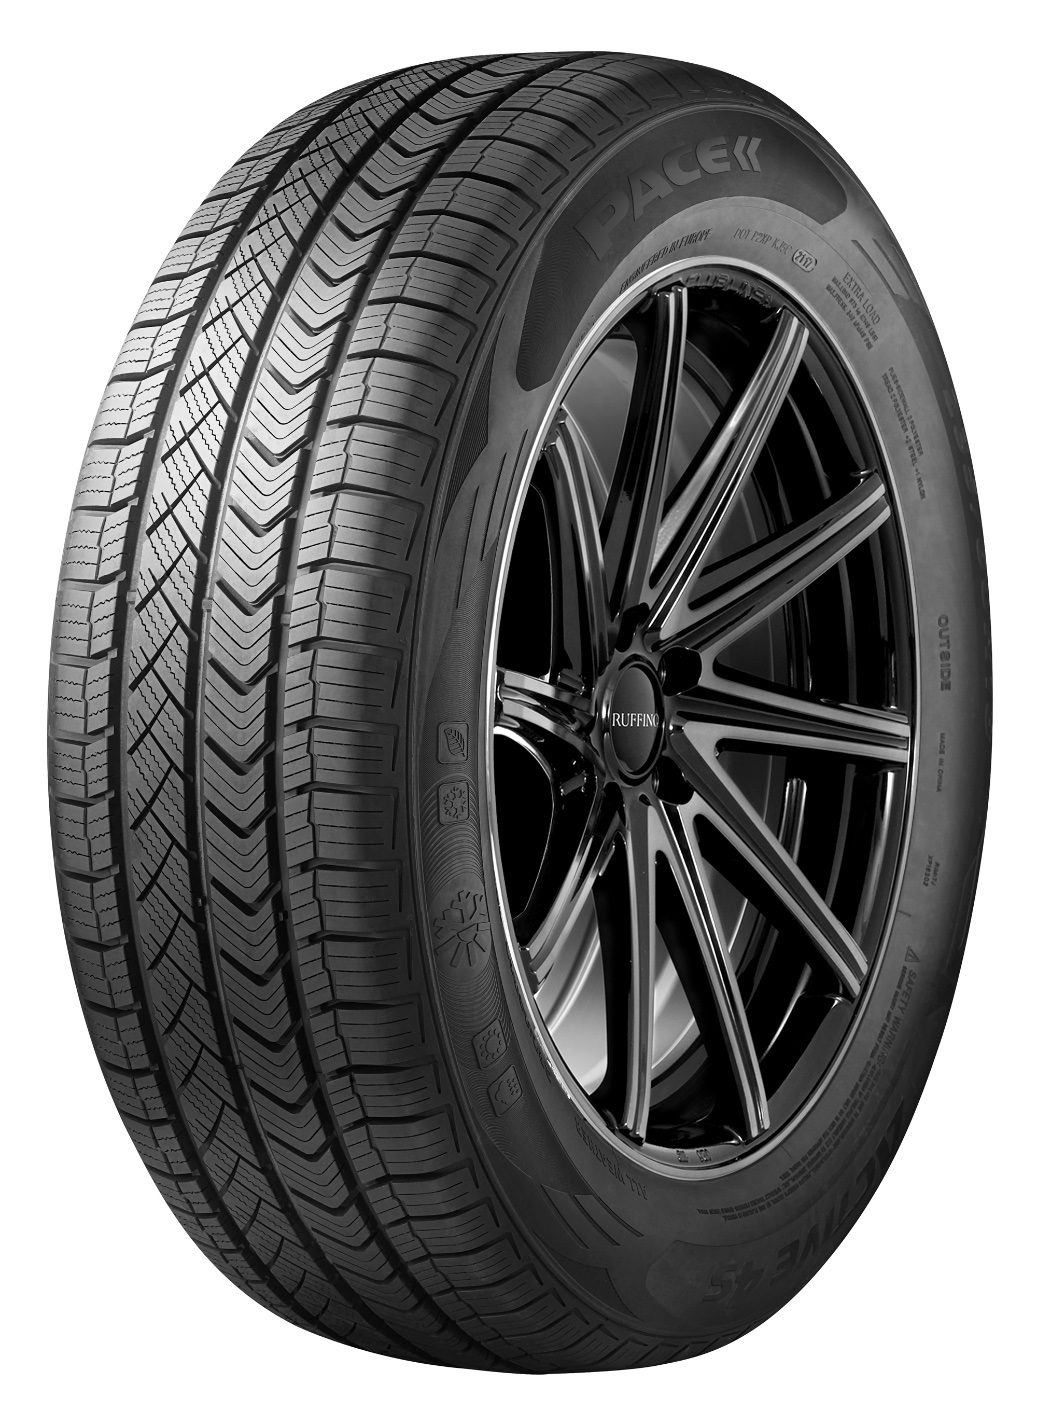 Gomme Nuove Pace 175/70 R14 88T ACTIVE 4S XL M+S pneumatici nuovi All Season